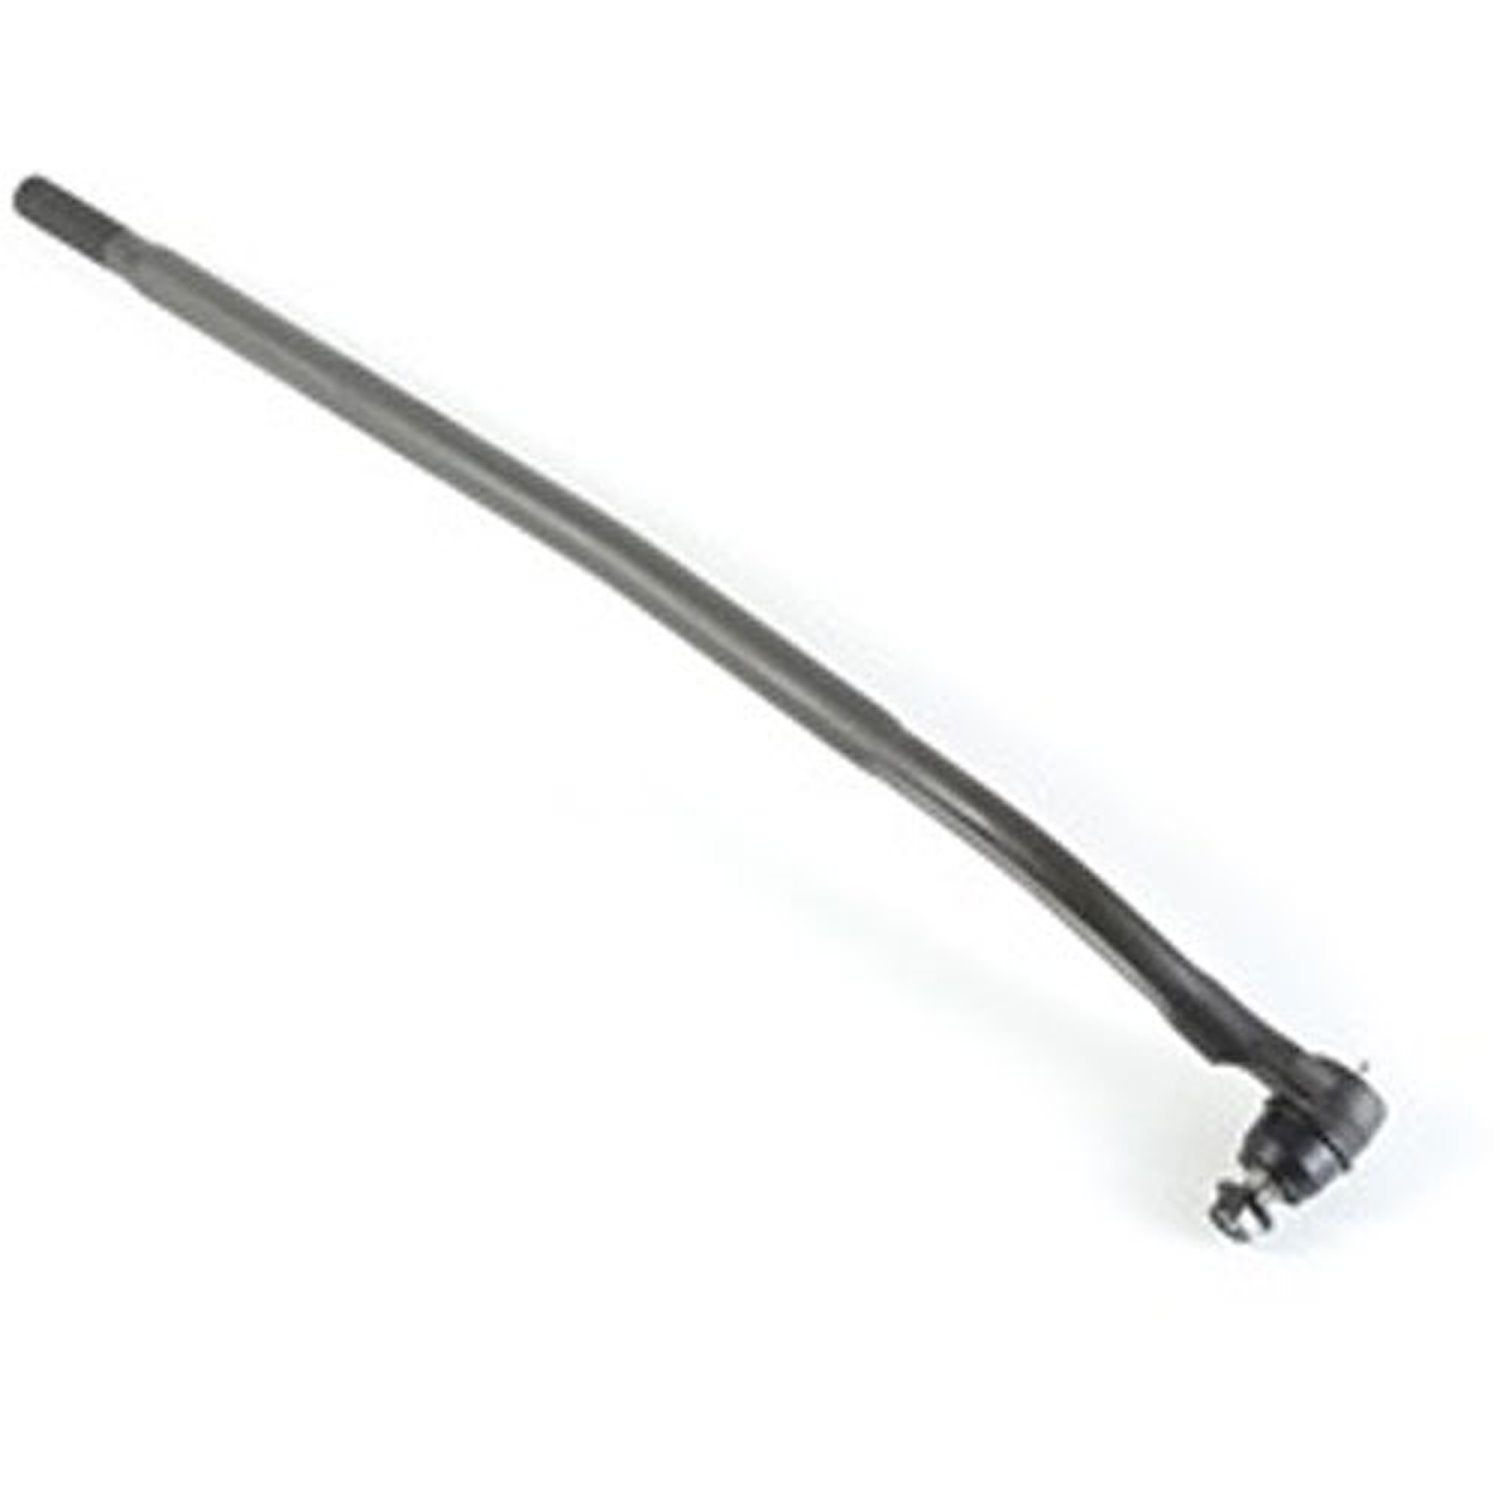 Replacement drag link tie rod end from Omix-ADA,